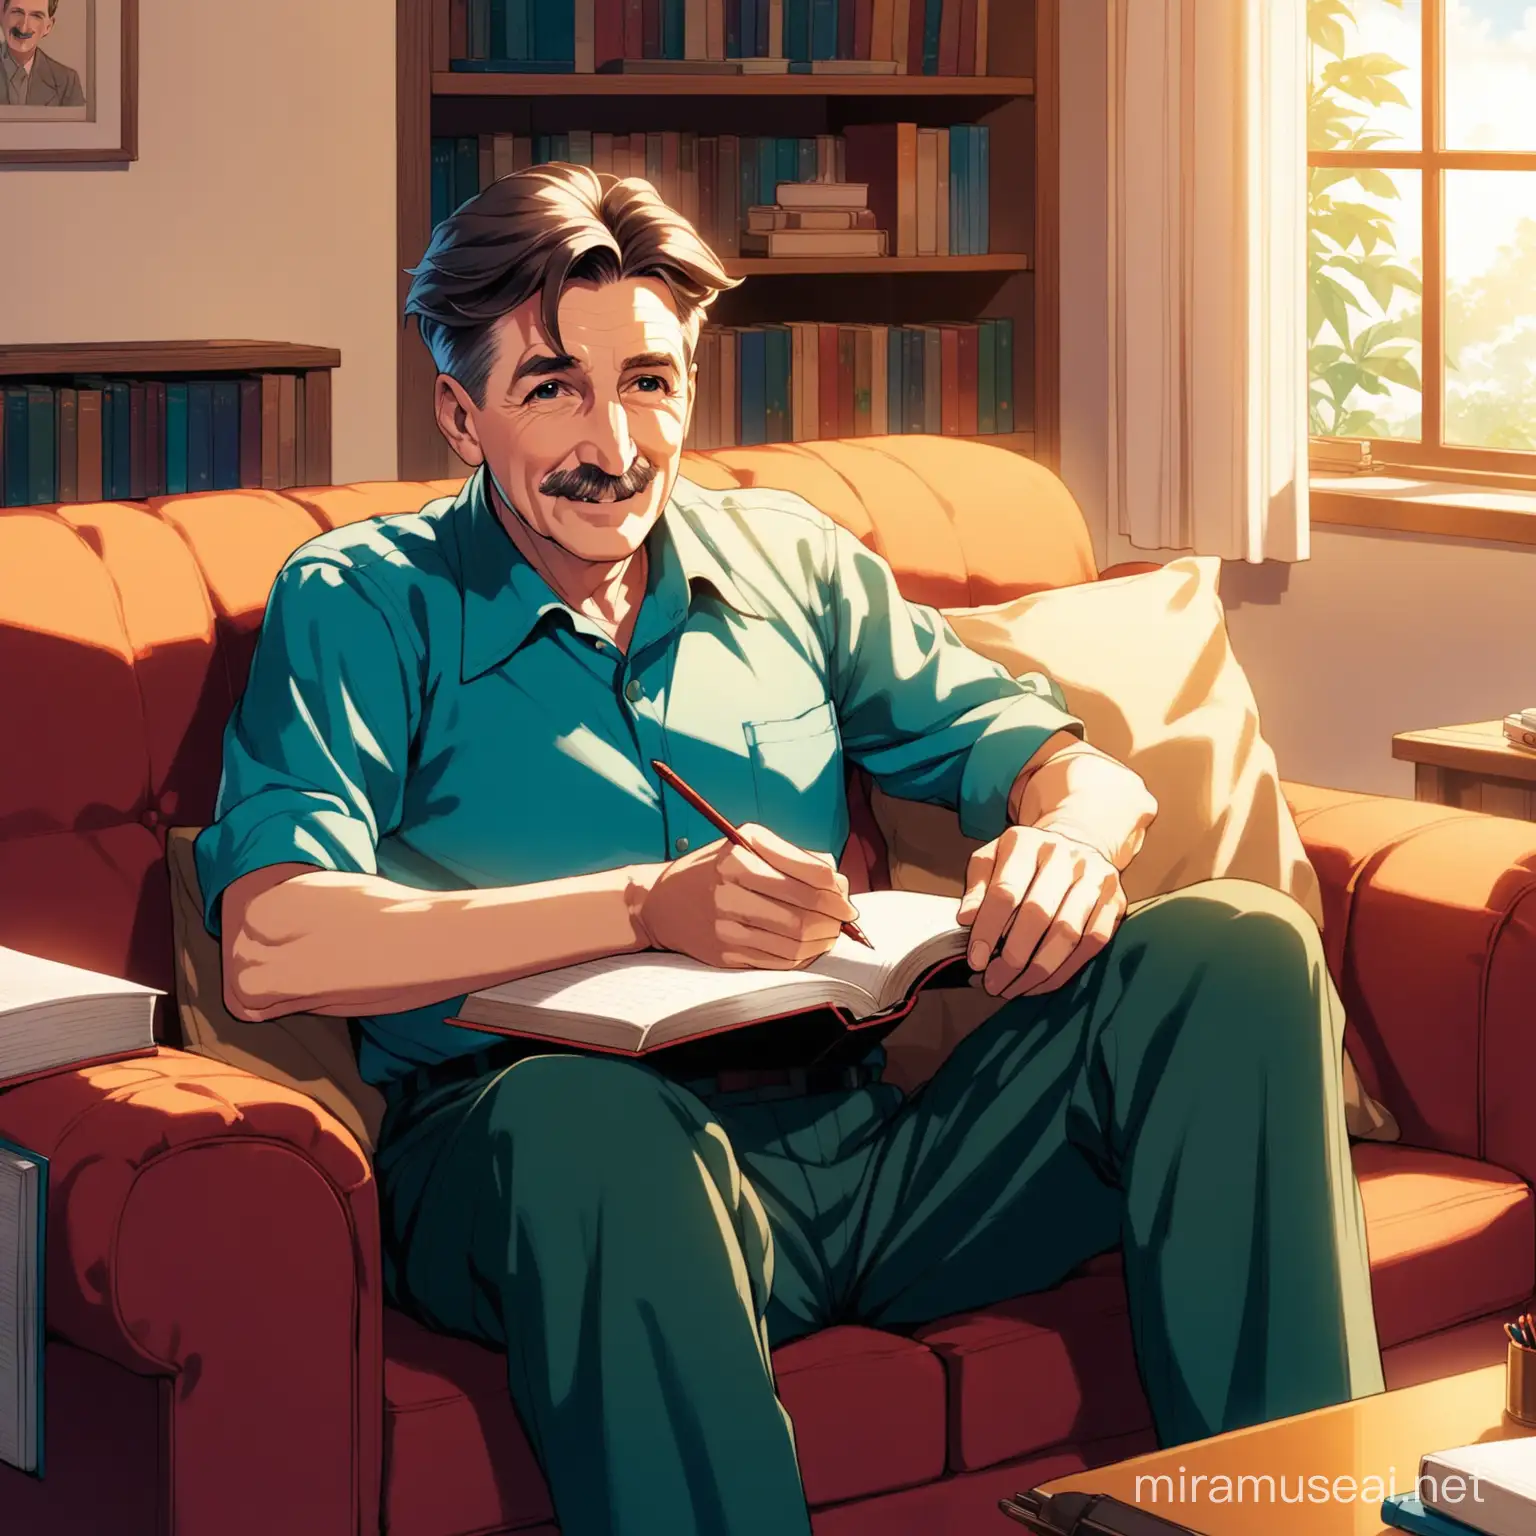 George Orwell sitting on his couch, in his living room, watching anime on his TV, while writing books, he looks very happy and entertained